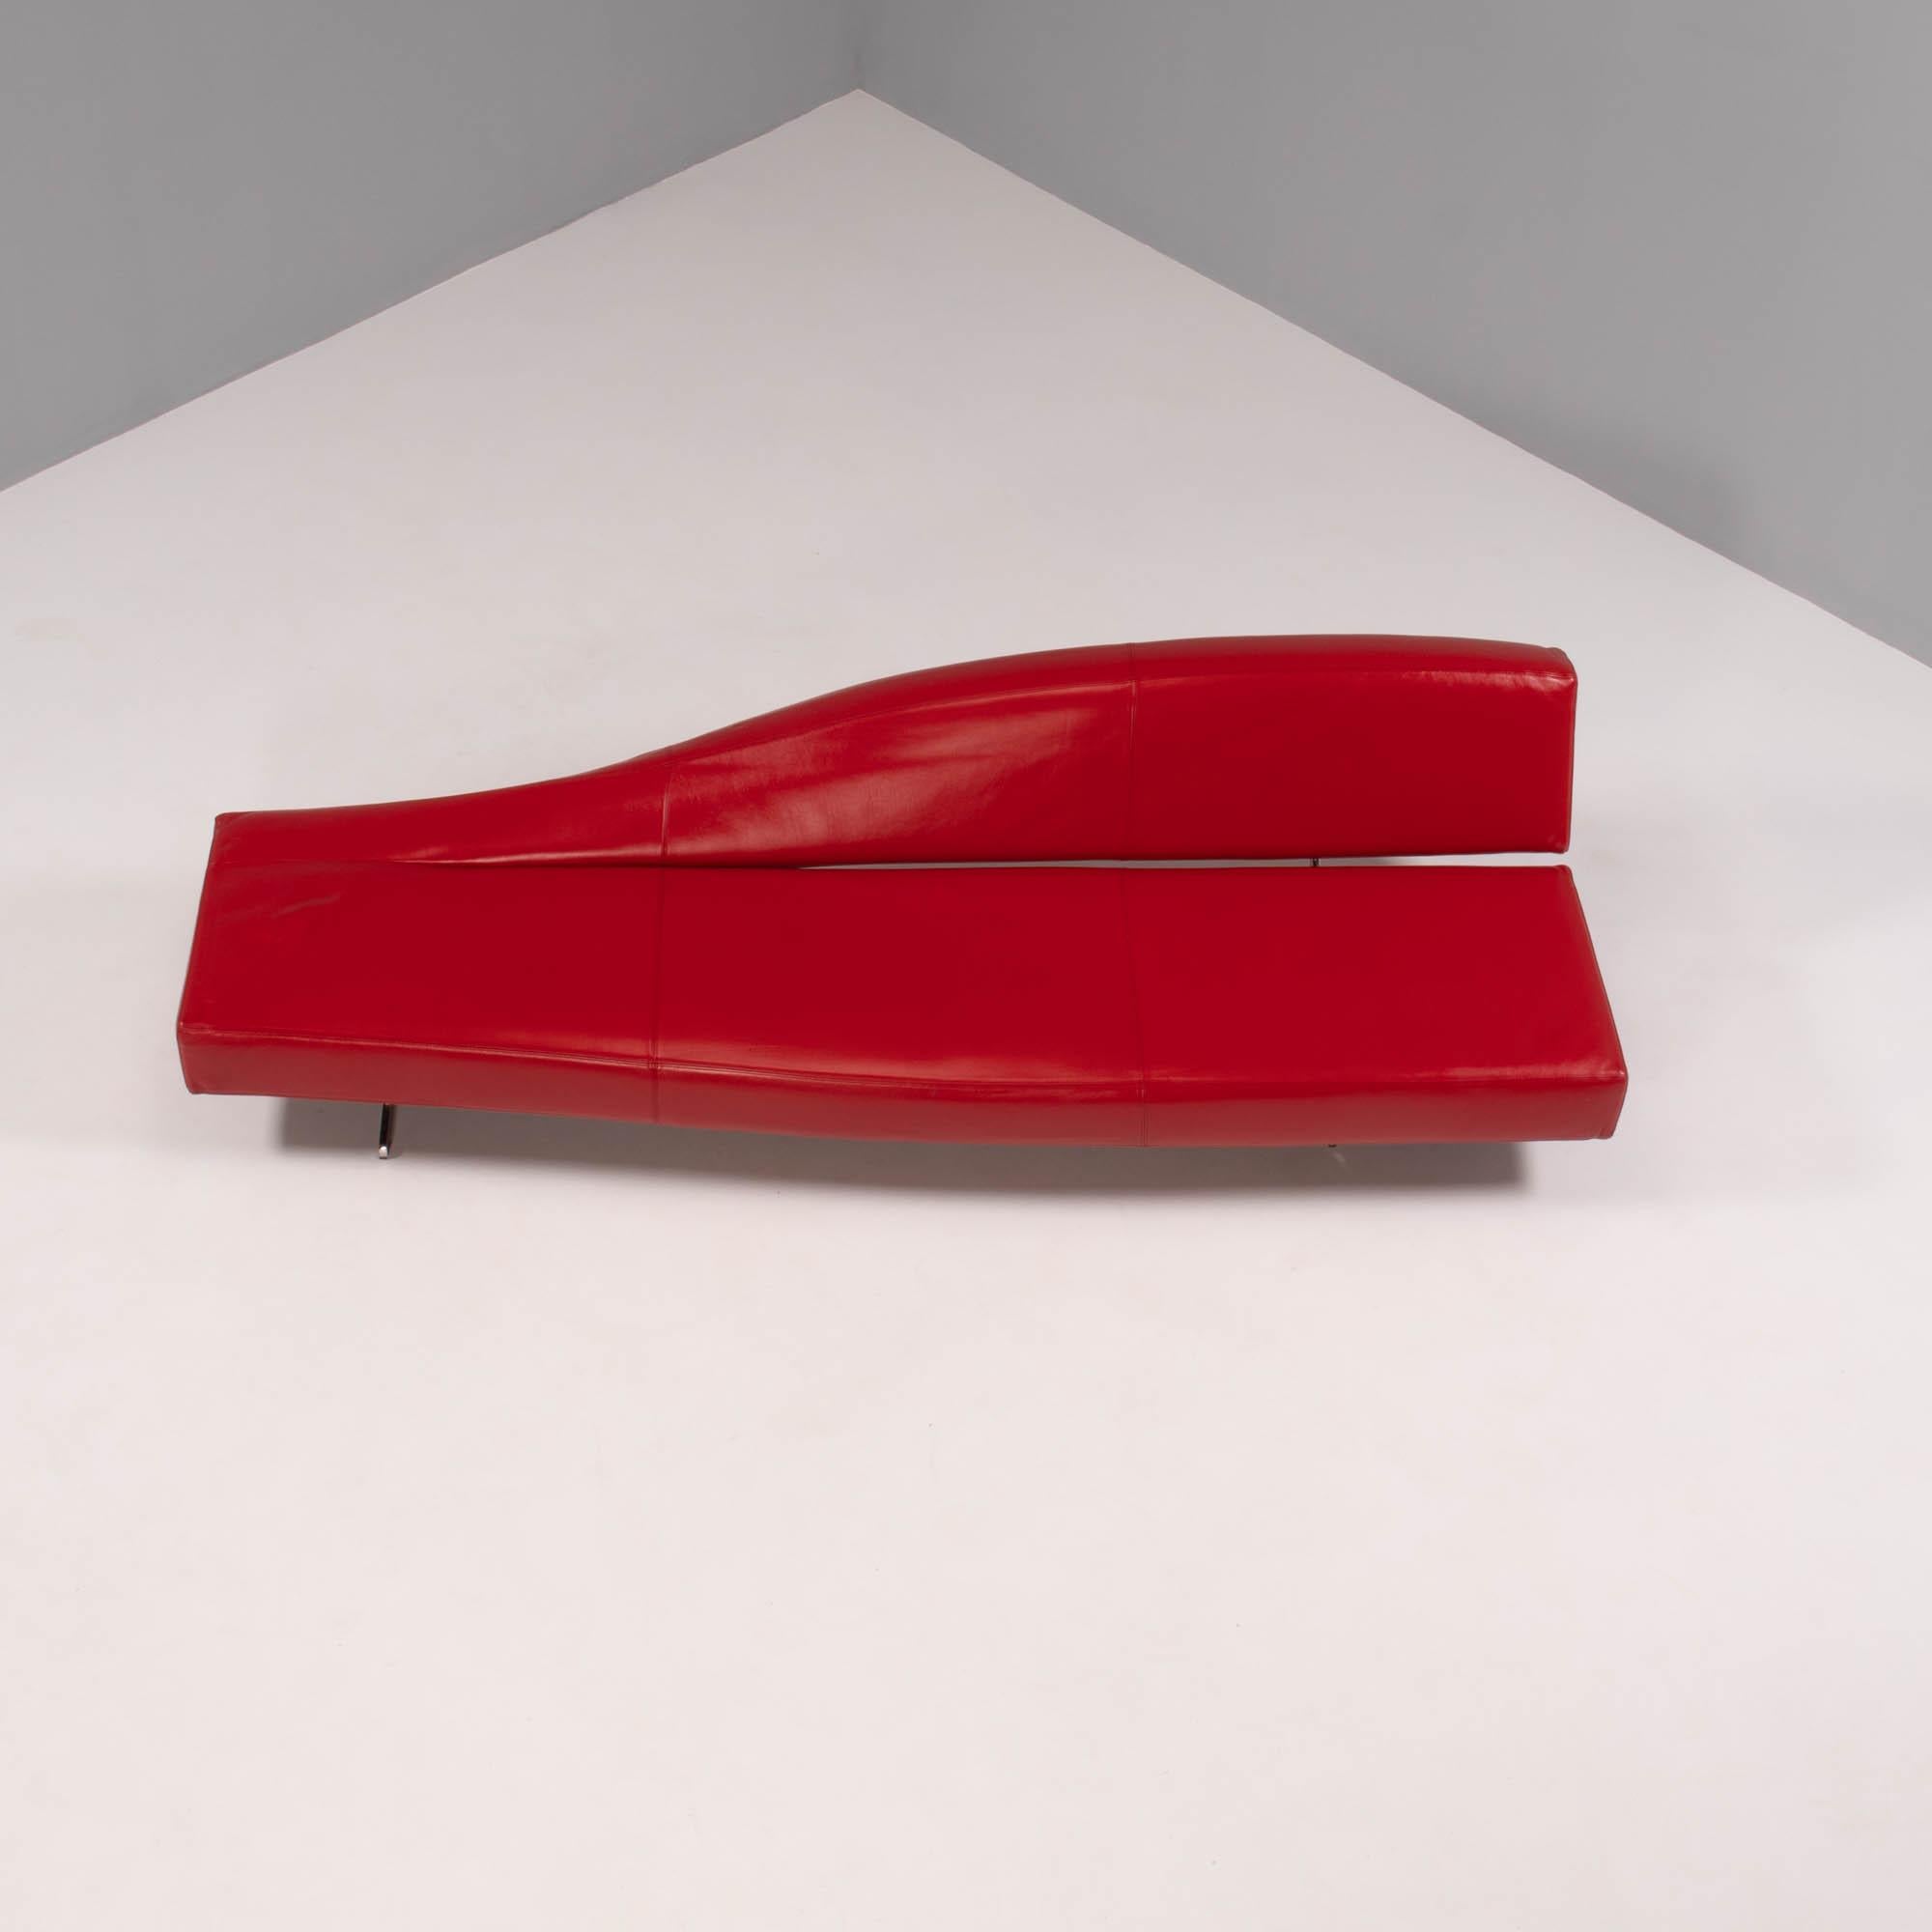 Originally designed in 2005 by Jean-Marie Massuad, the Aspen sofa is a sleek and sophisticated piece of modern design.

Upholstered in red leather, the sofa gives the illusion of being constructed from one continuous piece.

The sloping backrest